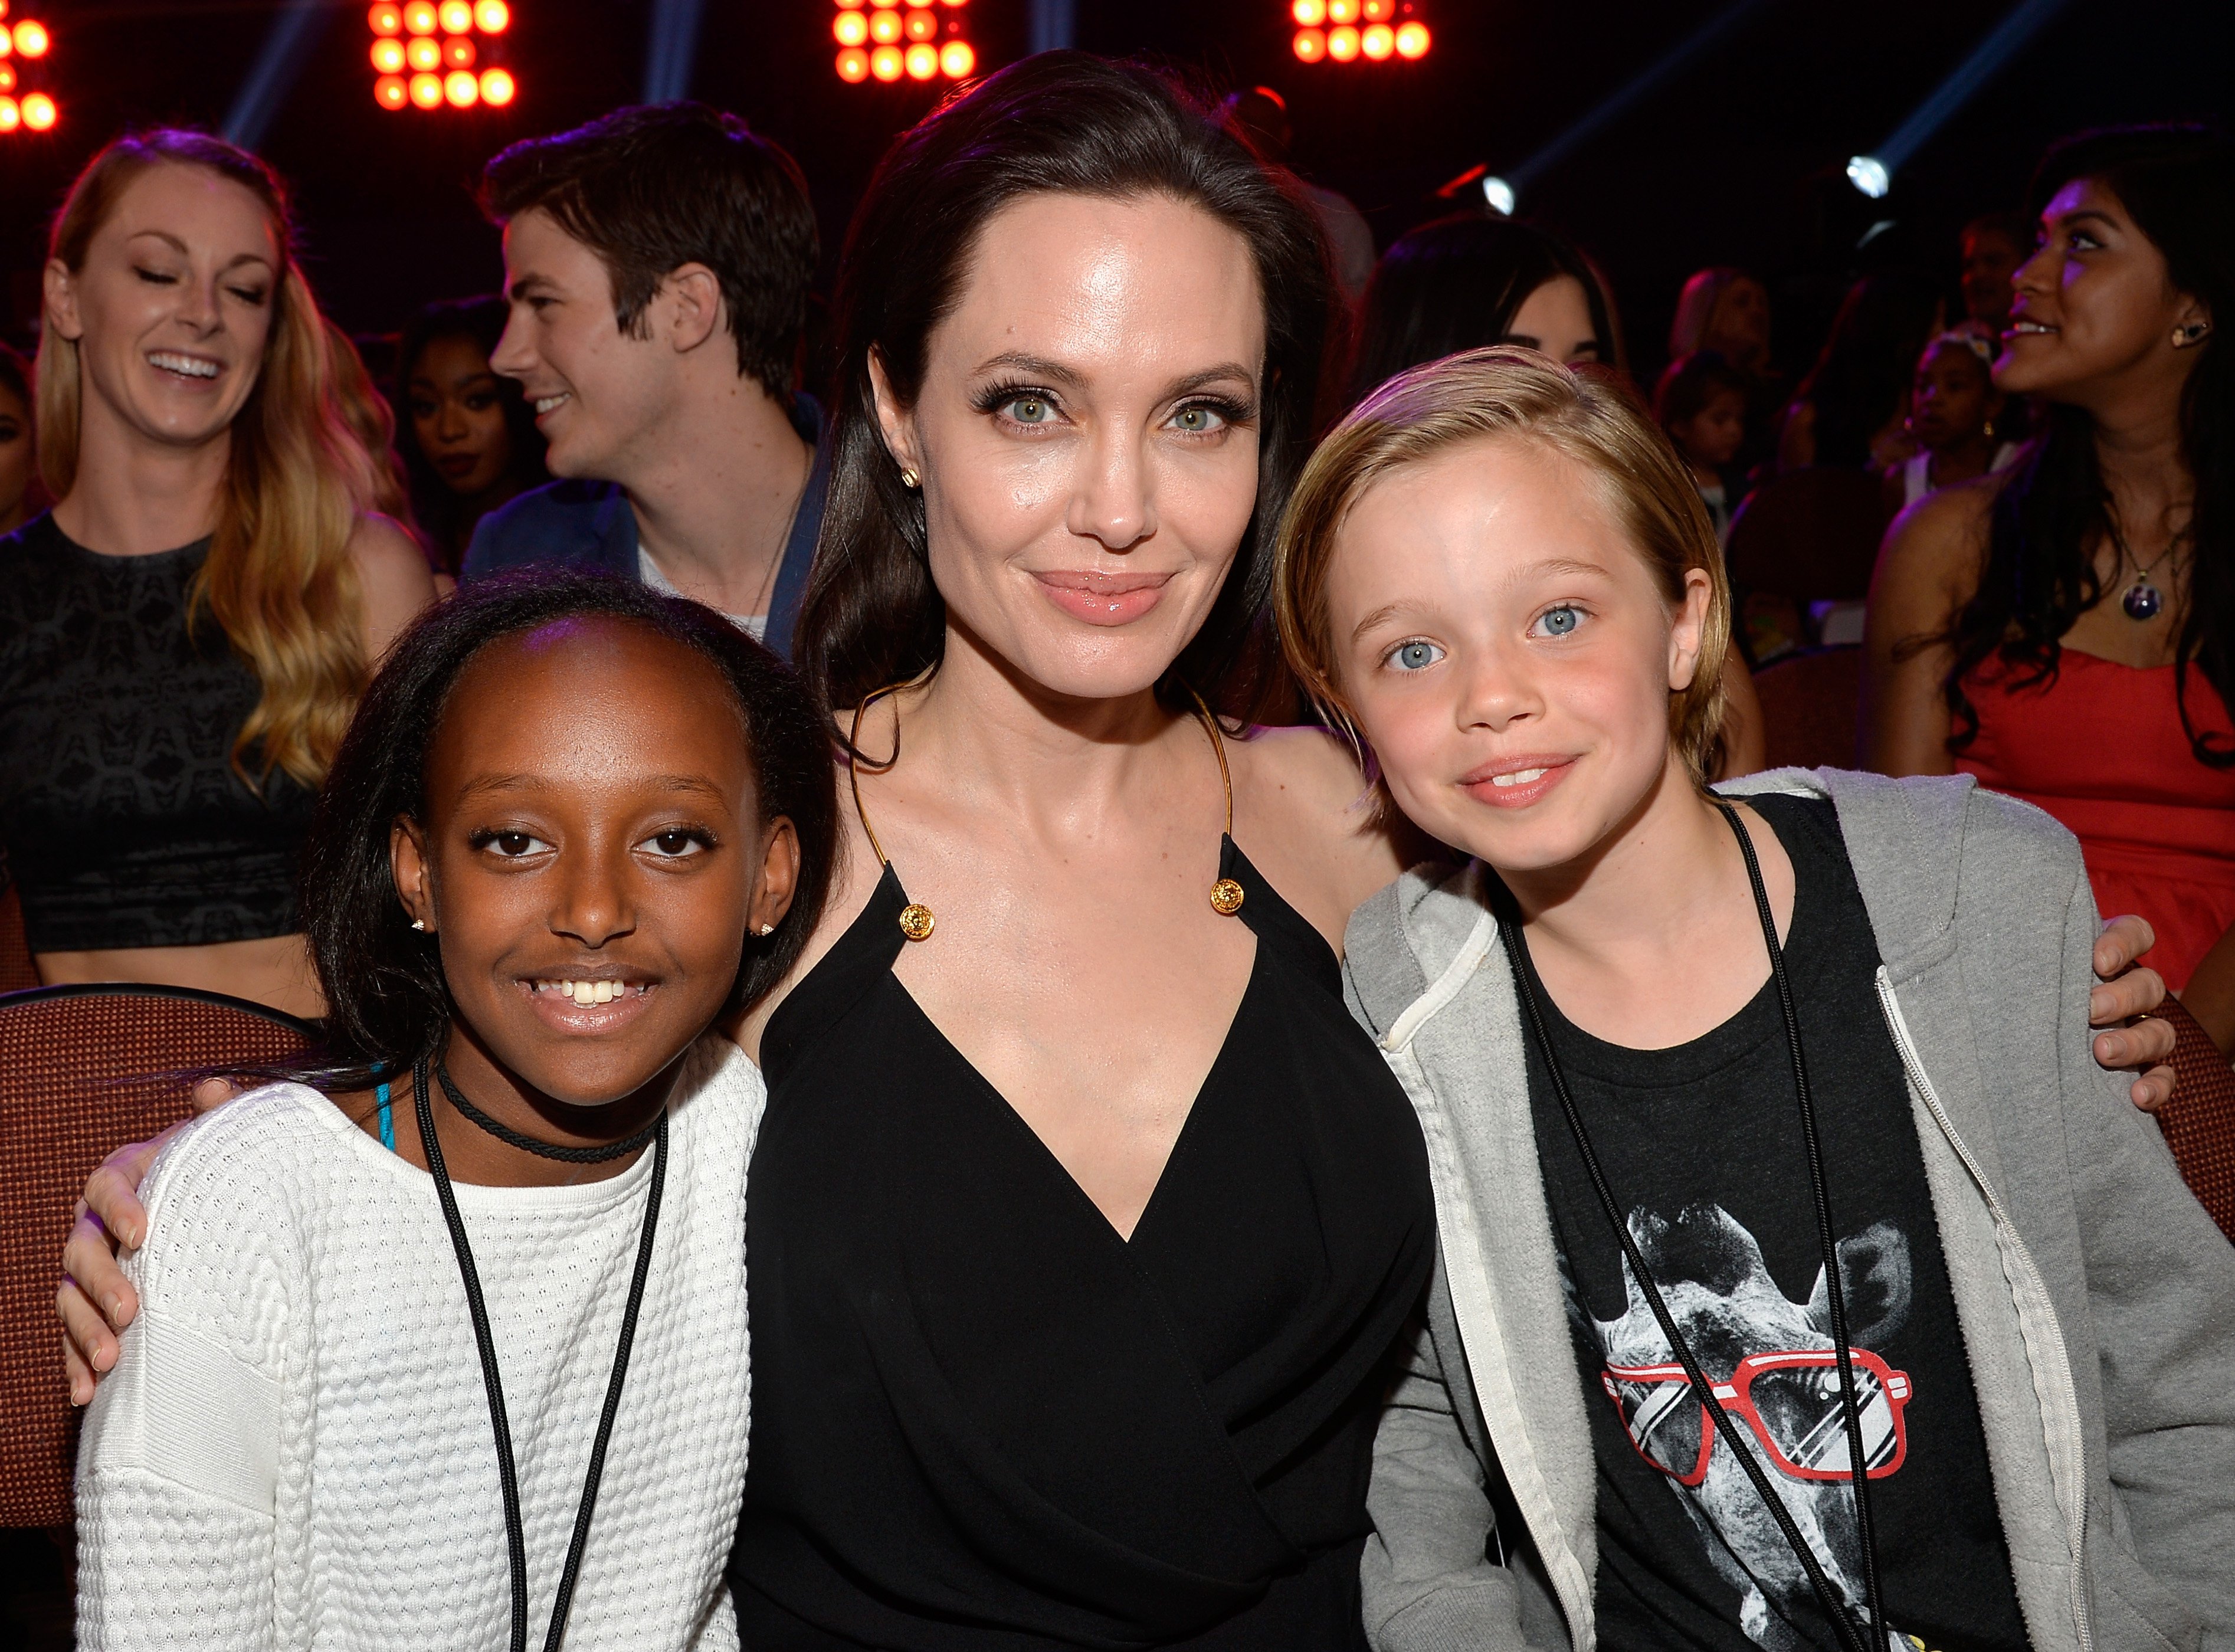 Actress/director Angelina Jolie with Zahara Marley Jolie-Pitt and Shiloh Nouvel Jolie-Pitt in the audience during Nickelodeon's 28th Annual Kids' Choice Awards held at The Forum on March 28, 2015 in Inglewood, California. | Source: Getty Images